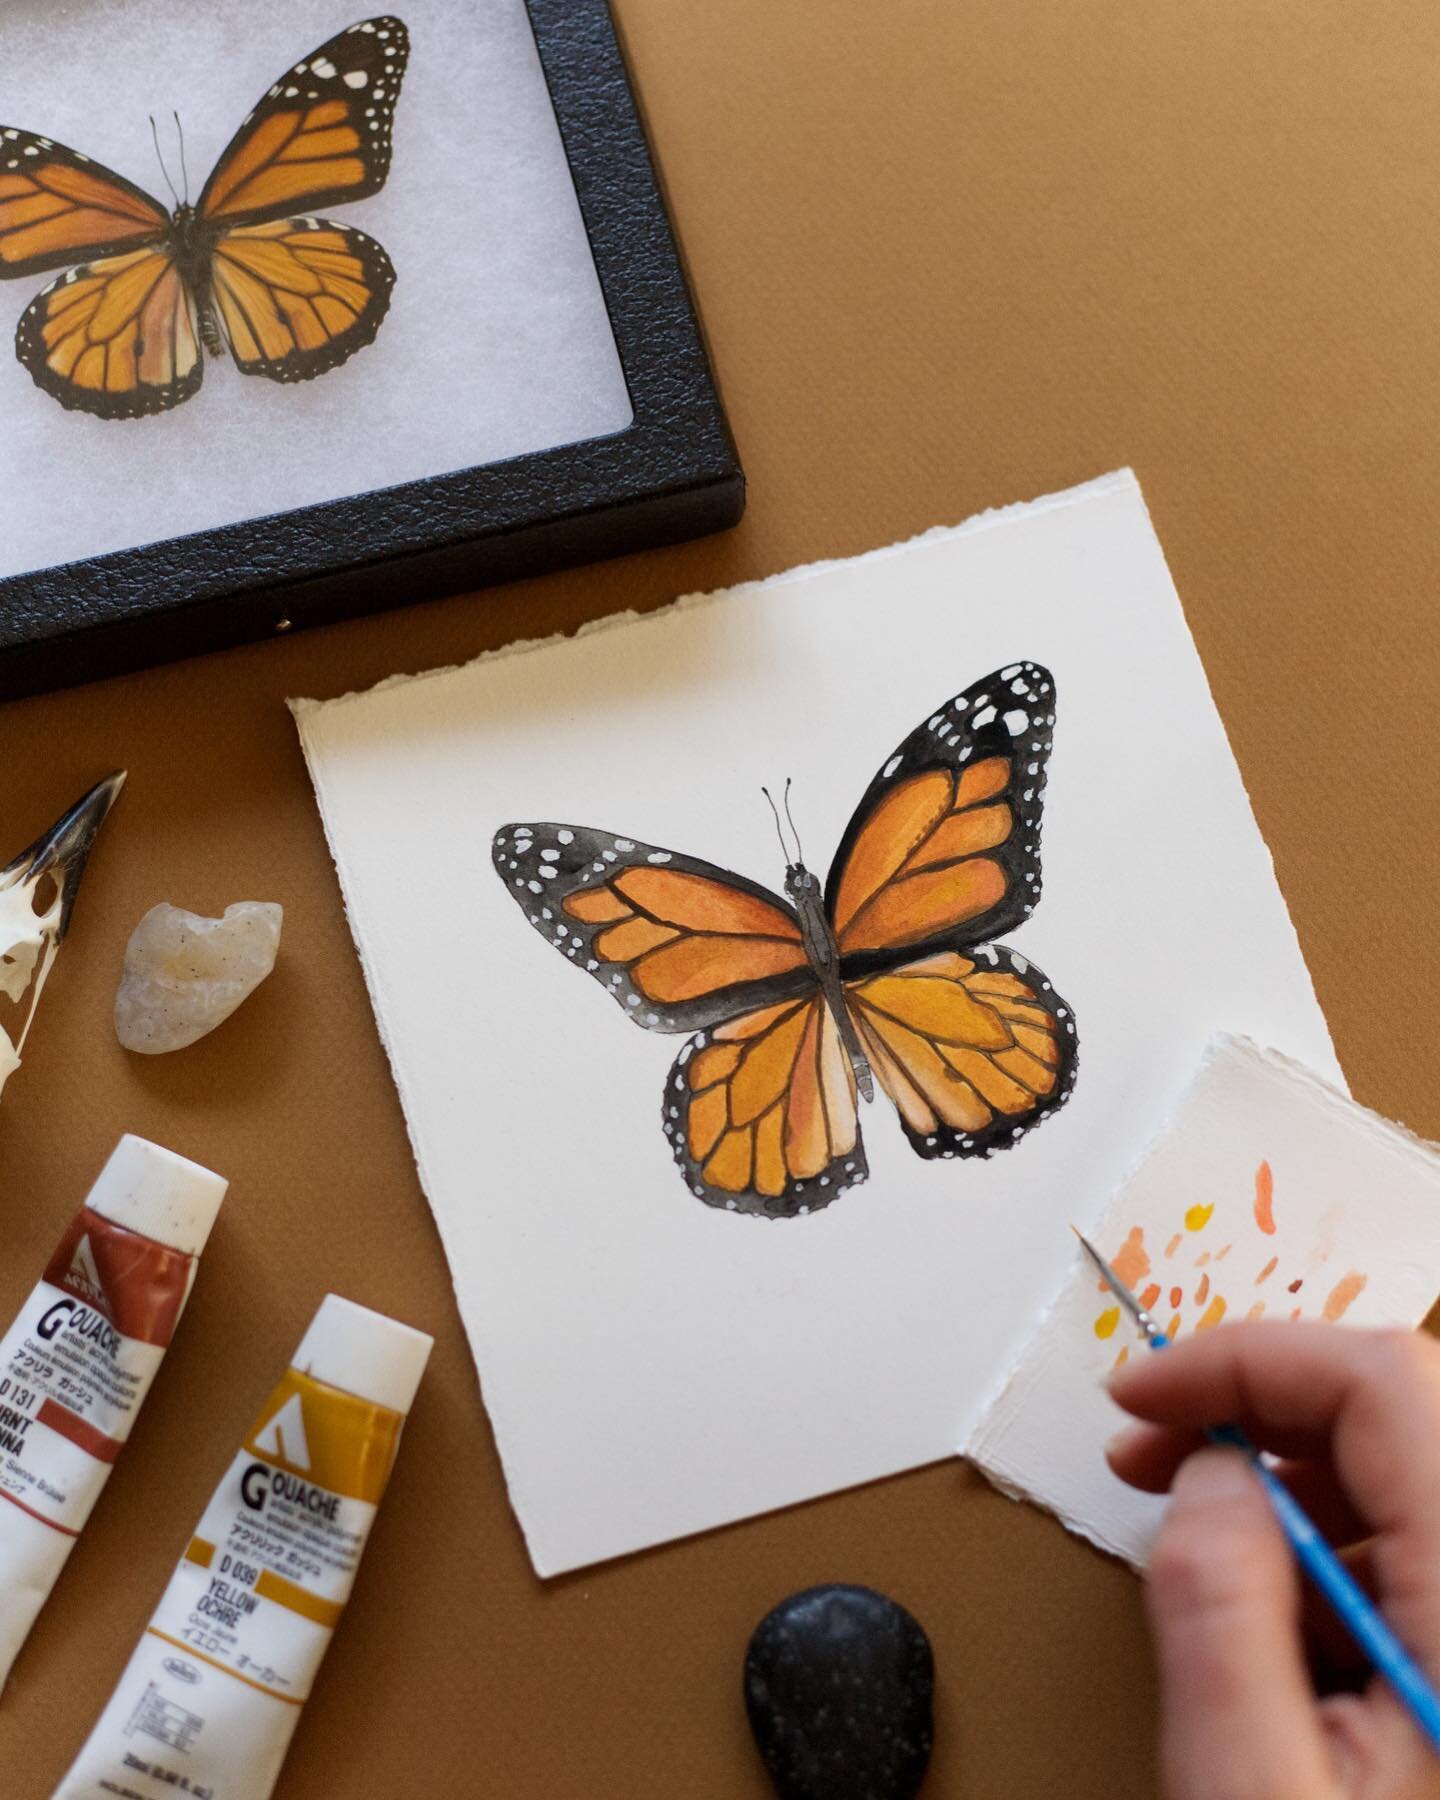 It was so lovely to make a small study of this preserved Monarch Butterfly (Danaus Plexippus)! It was a total reminder that spending time with the real thing if at all possible makes a world of difference. I think for me, that means sketching out in 